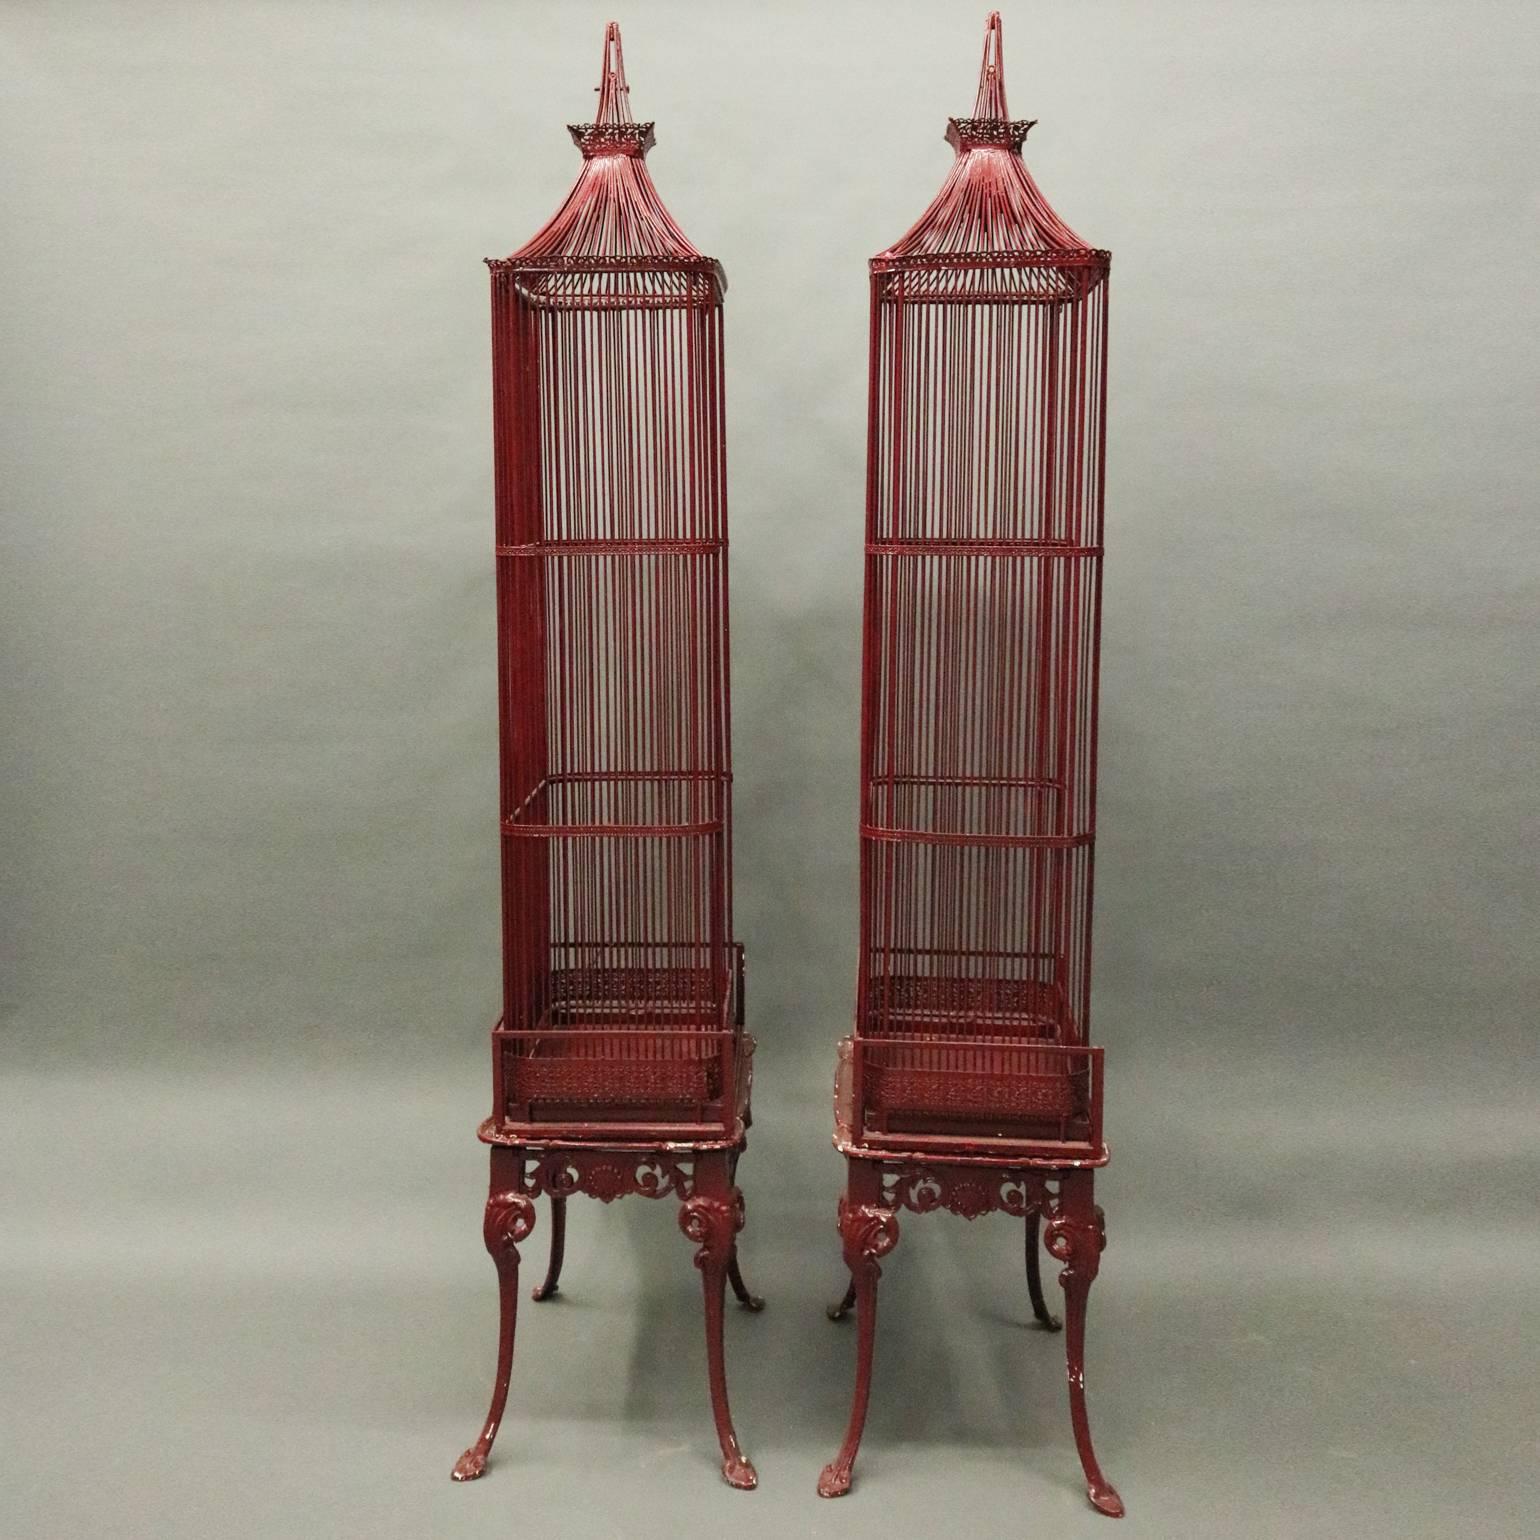 Pair of French Chinoiserie red painted cast metal display cabinets feature pagoda style bird cage design seated on shell and acanthus decorated cabriole legs each connected by pierced apron of scroll and acanthus, circa 1940

Measure - 83.5